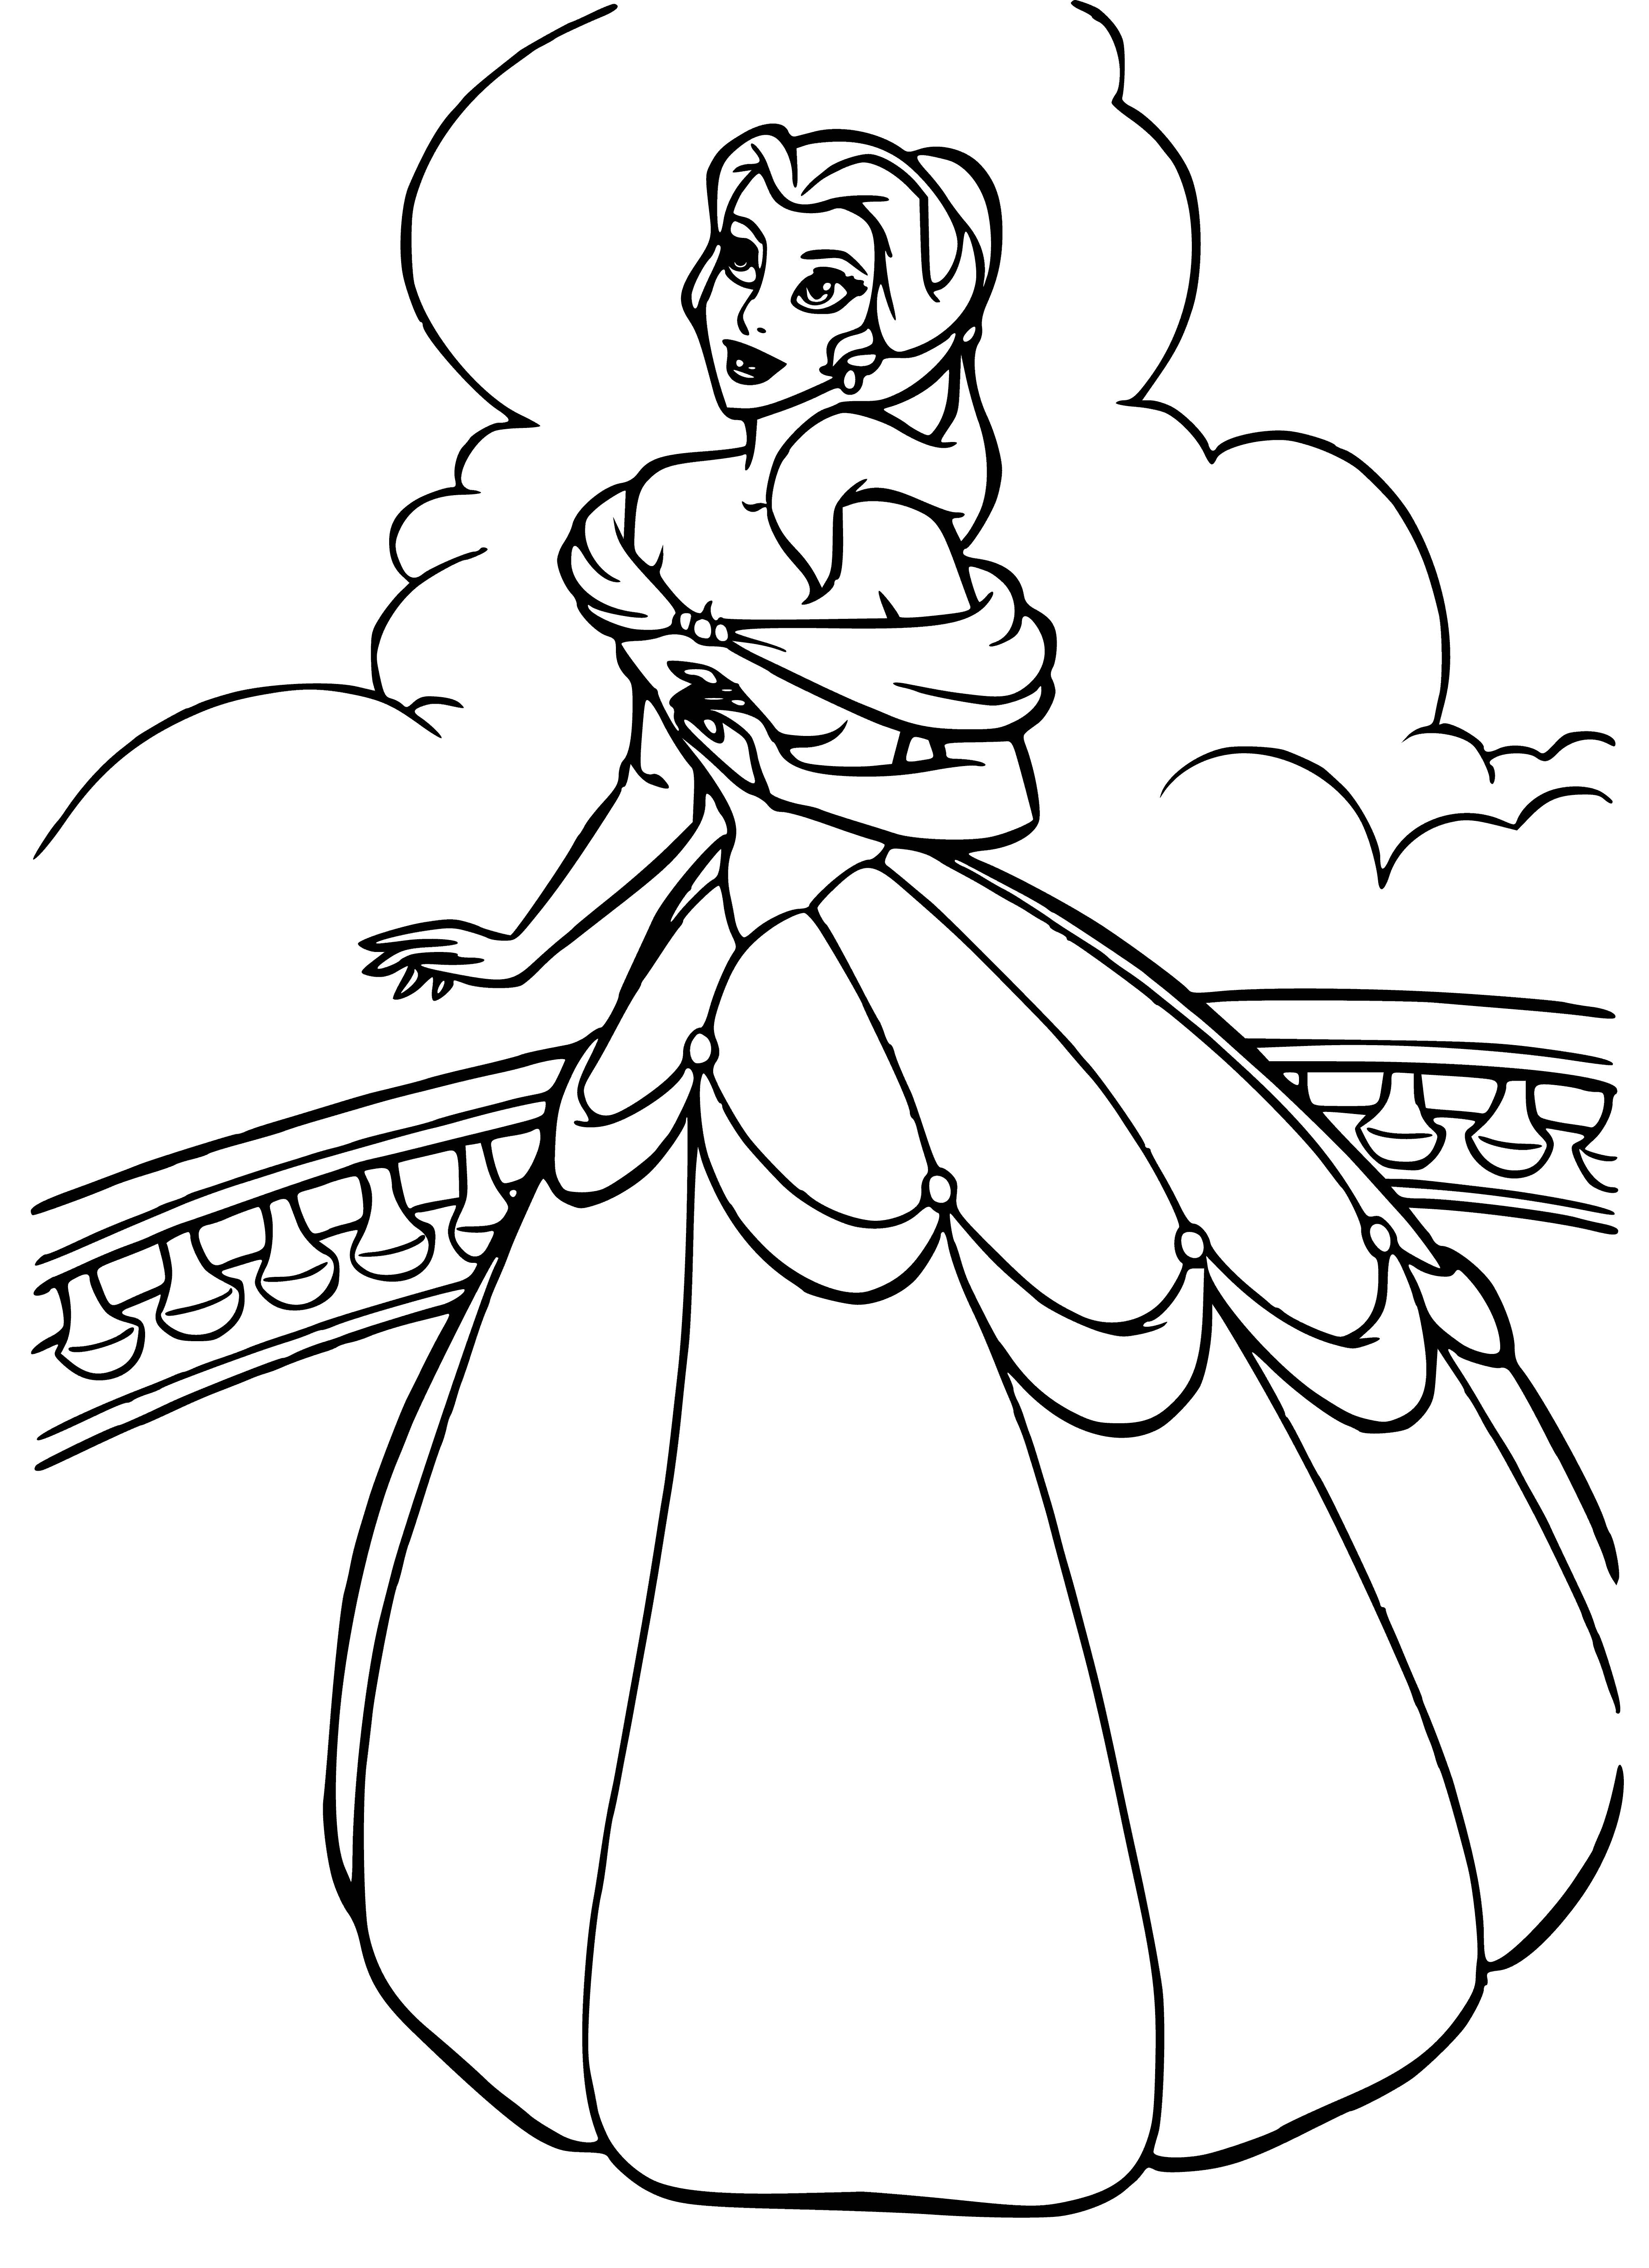 Belle on the balcony coloring page